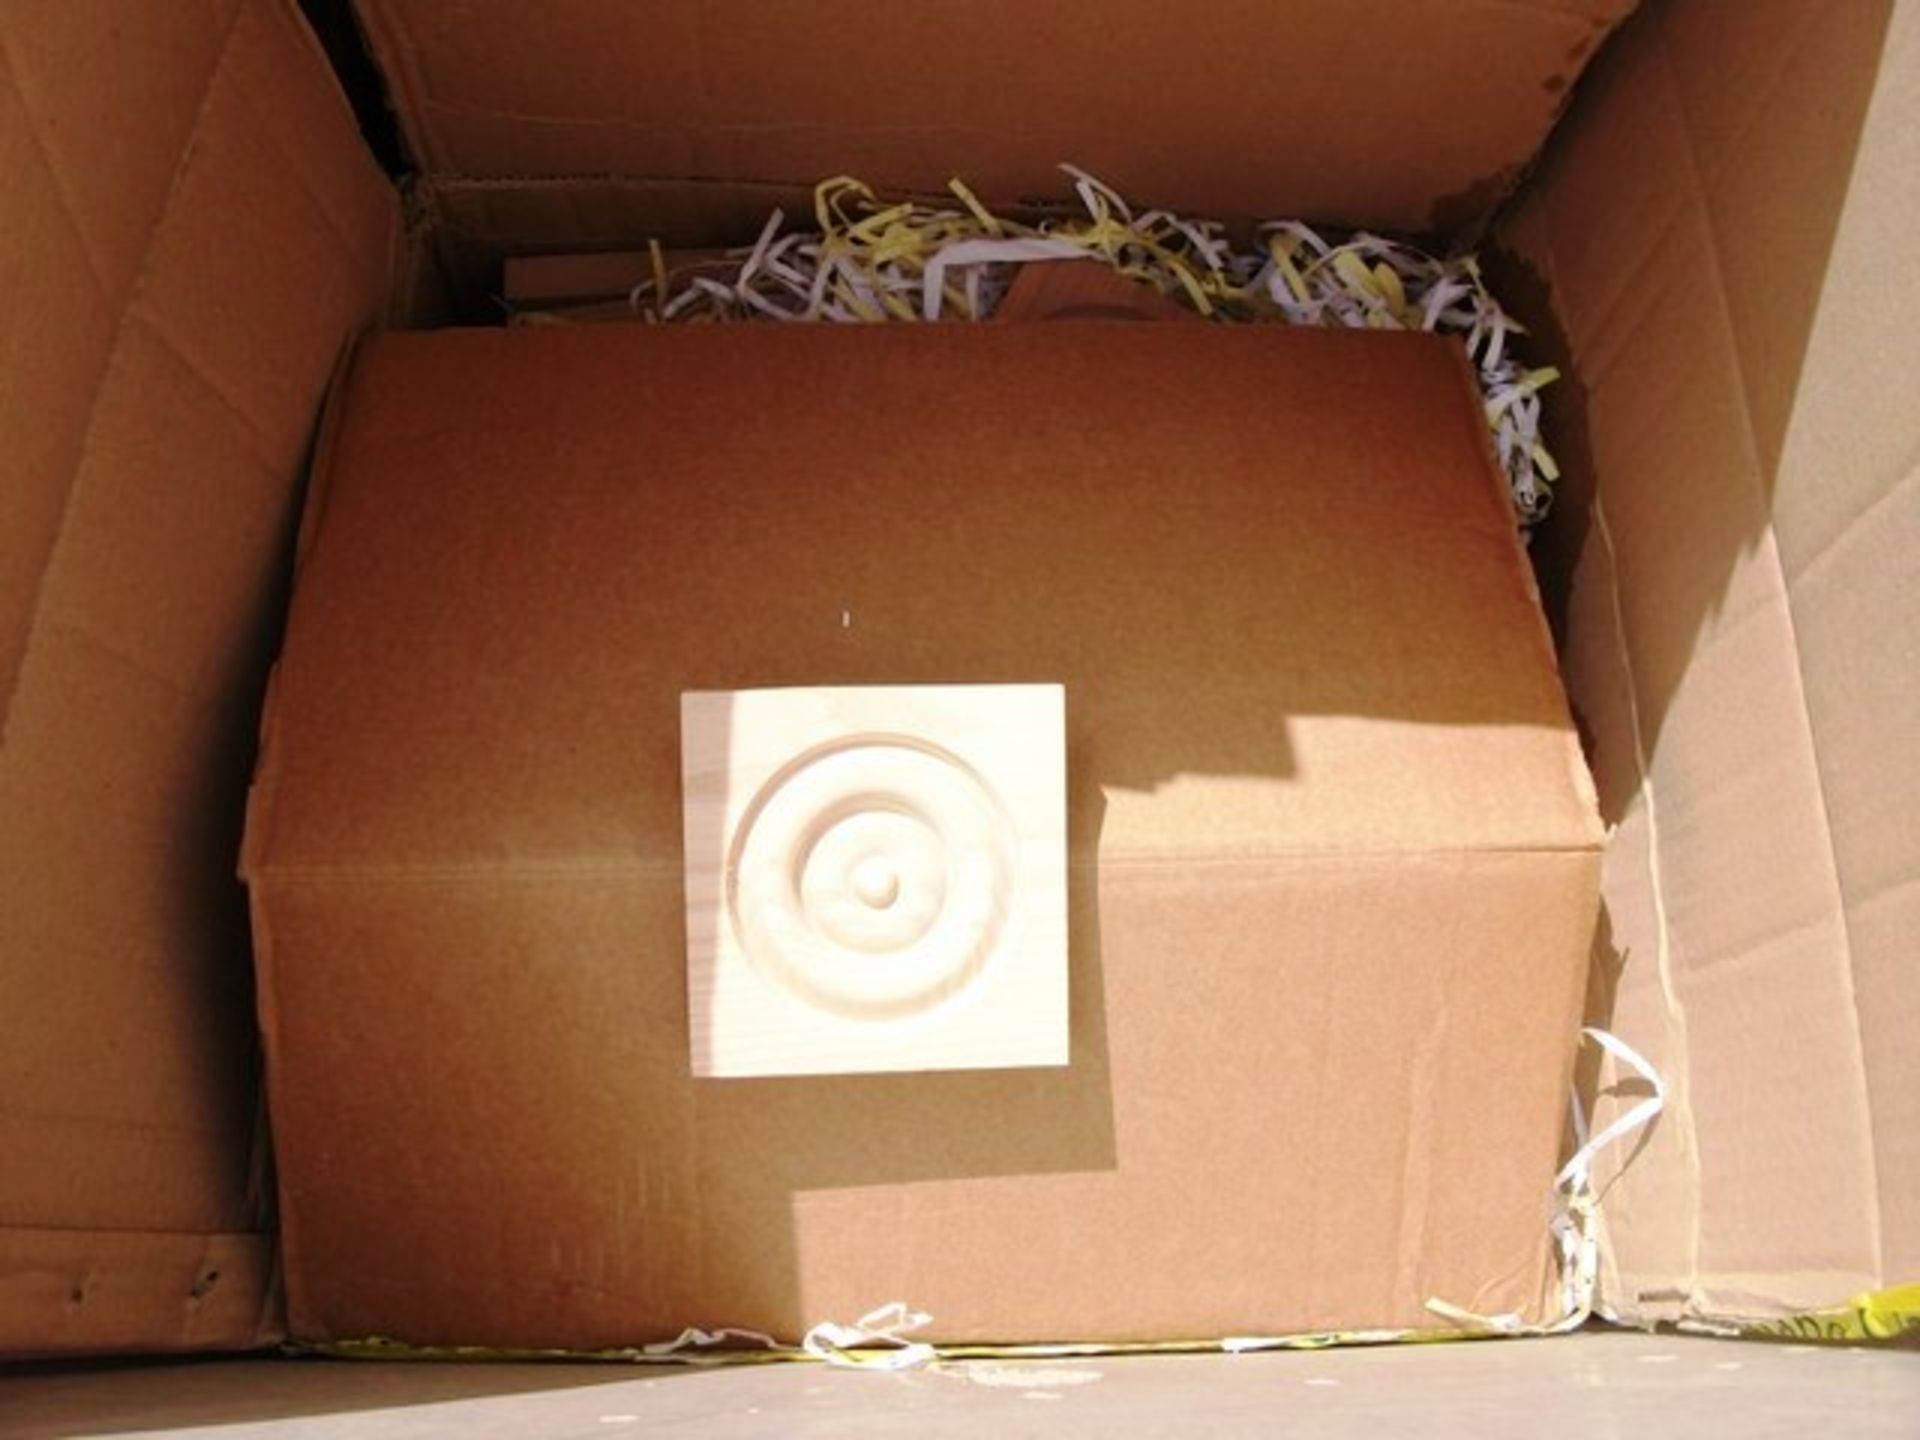 BOX WITH 4 PAIRS DUNLOP WELLINGTON BOOTS, CROMPTON BULBS, WOODEN TRIMS, PLASTIC TRAYS - Image 5 of 12